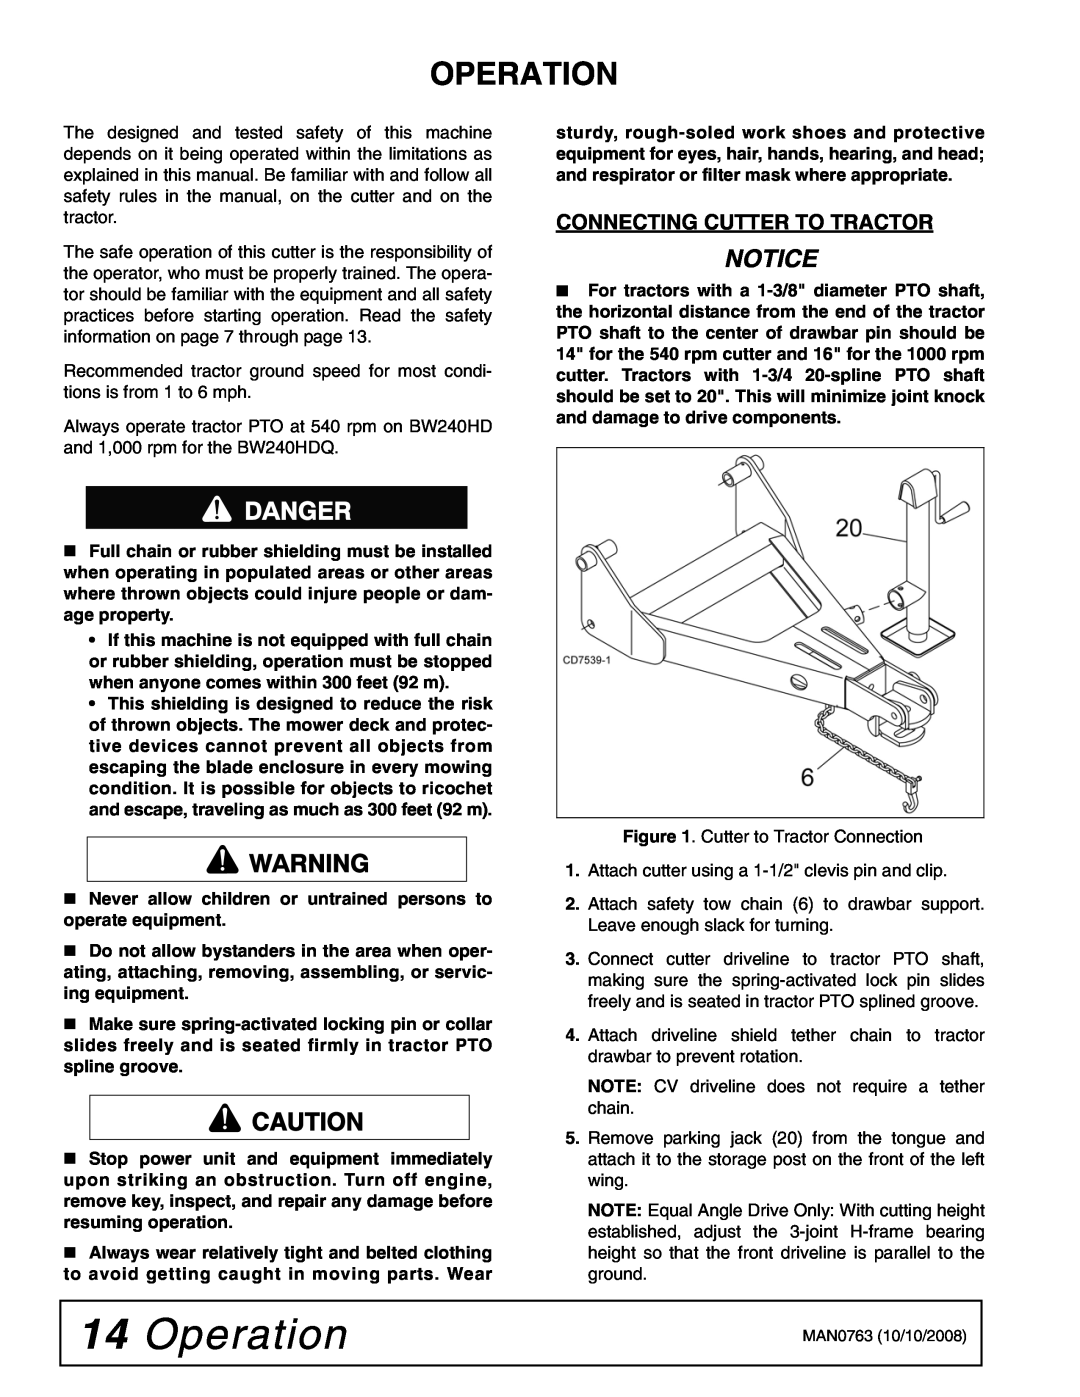 Woods Equipment BW240HDQ manual Operation, Connecting Cutter To Tractor 